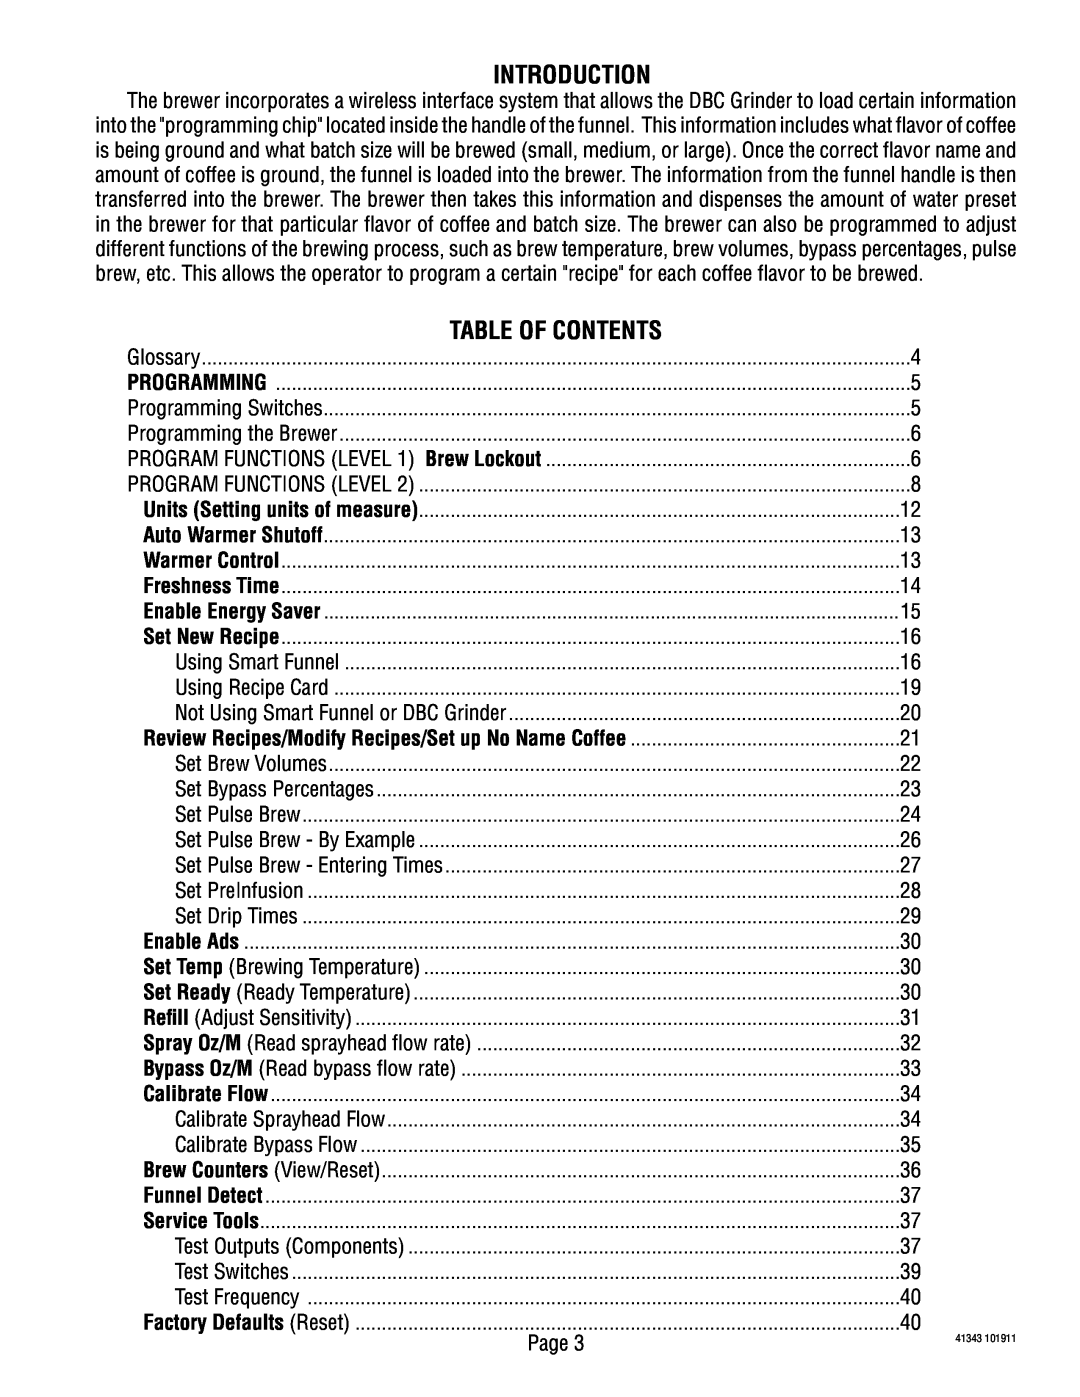 Bunn 41343 manual Introduction, Table Of Contents 